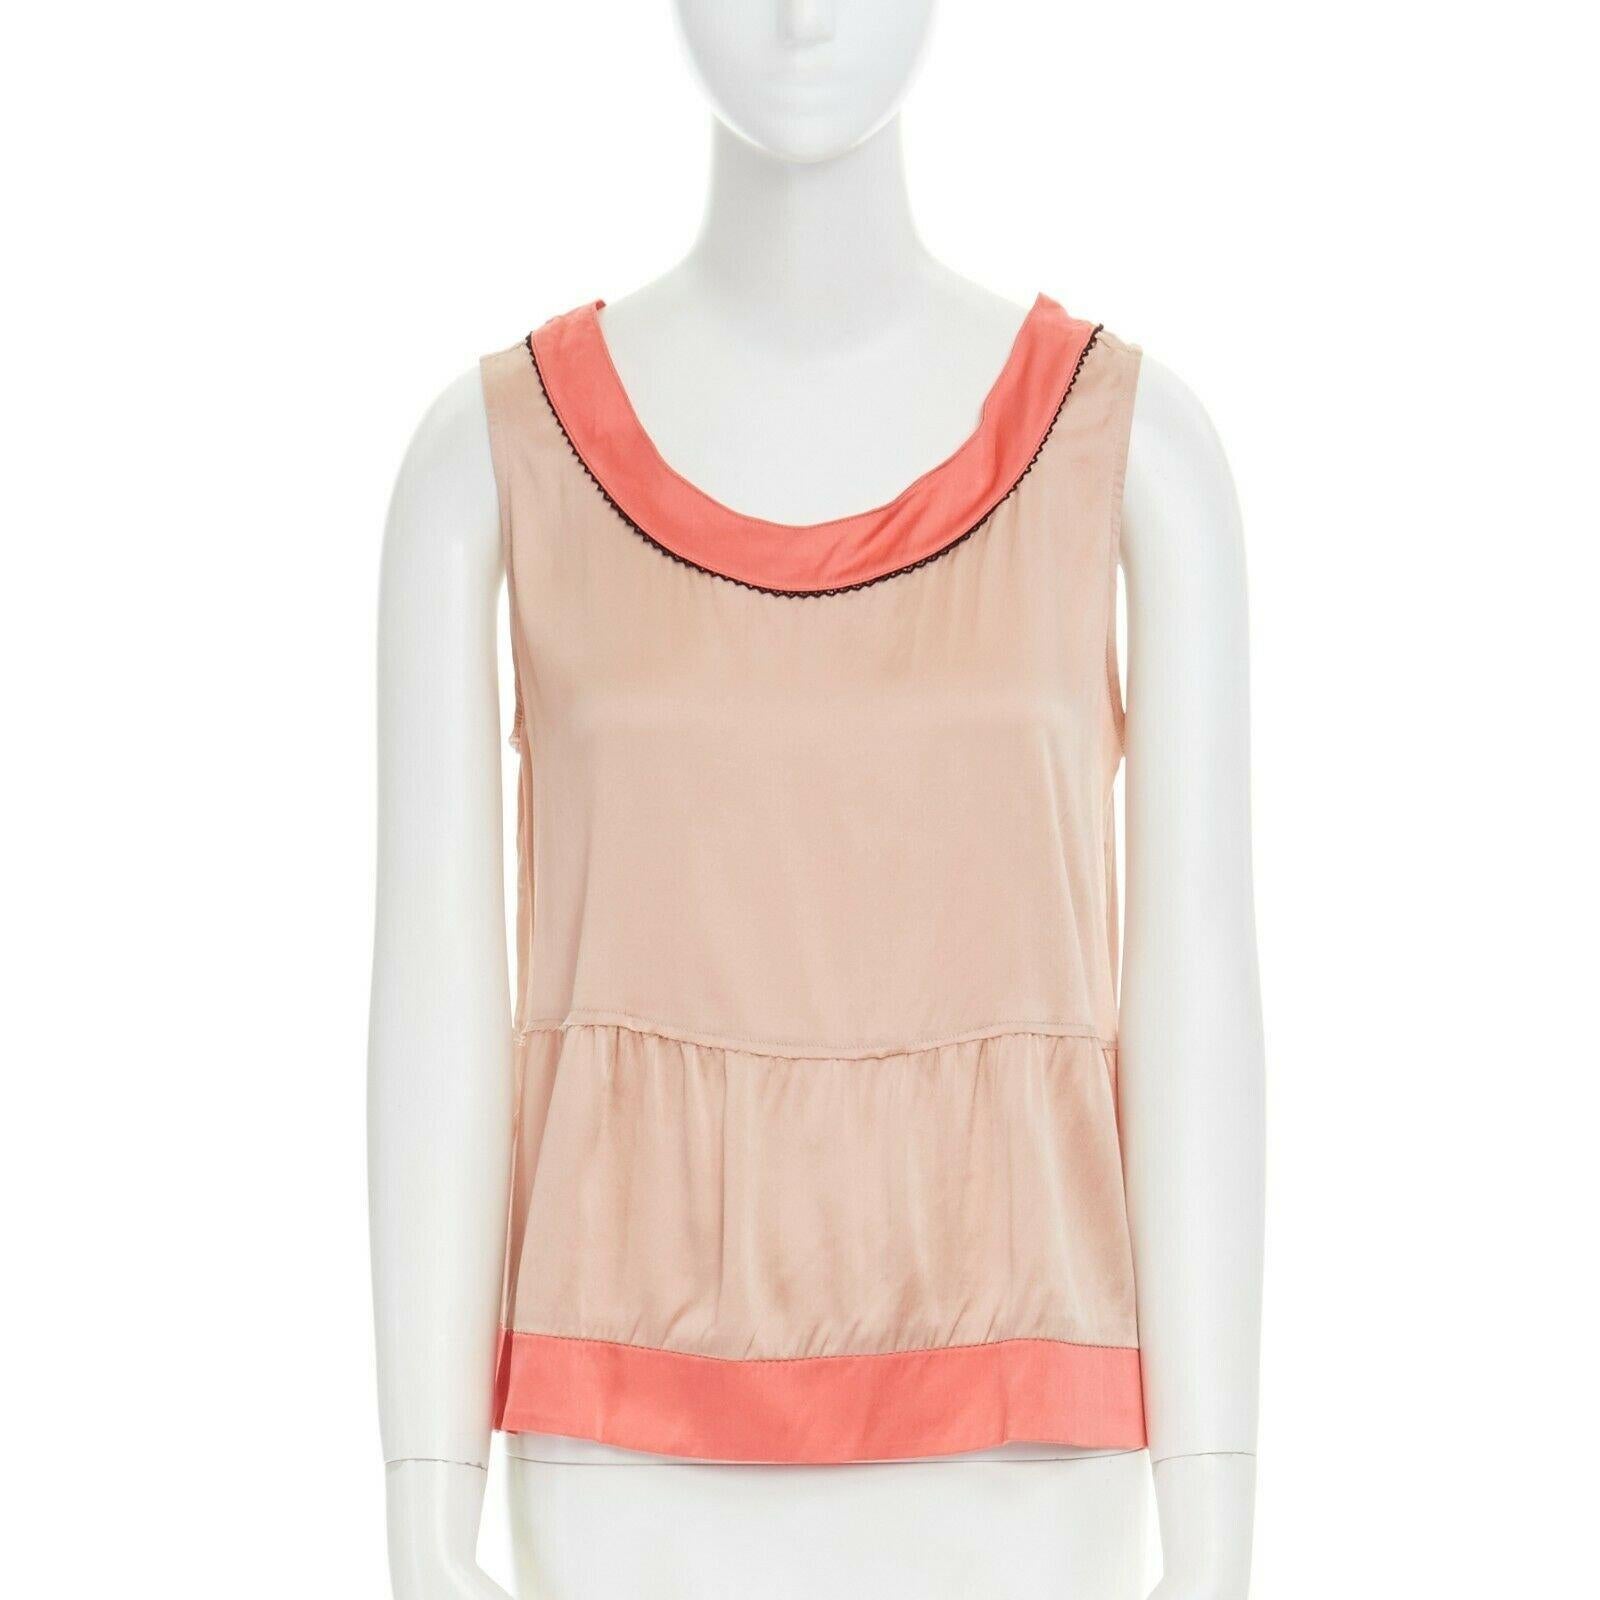 MARNI beige silk blend pink trimmed scoop neck babydoll flared top Sz. 1 S
Brand: Marni
Model Name / Style: Silk top
Material: Silk, elastane
Color: Beige
Pattern: Solid
Closure: Pull on
Extra Detail: Scooped neck. Babydoll flared hem. Sleeveless.